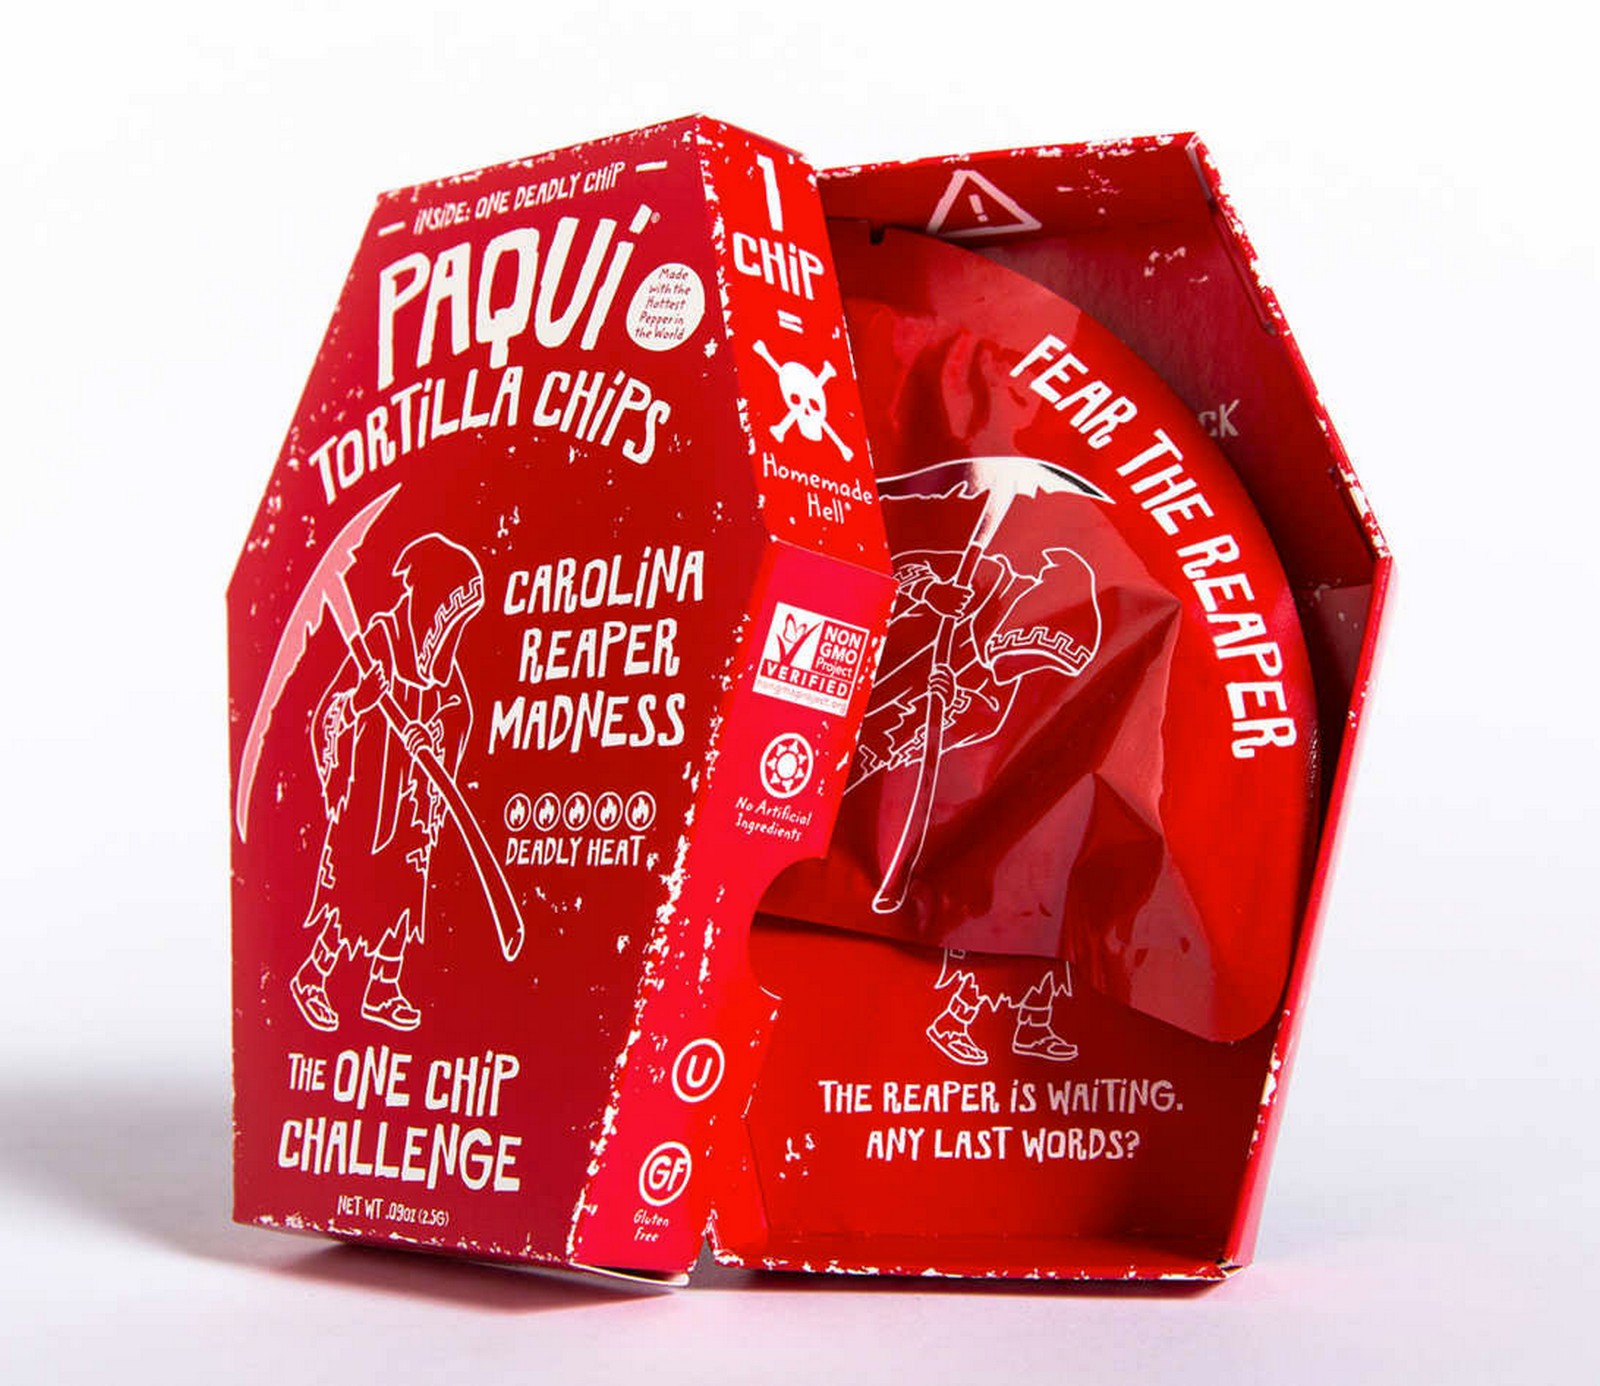 Paqui Chips sells the hottest chip on earth, The Carolina Reaper Madness chip and challenges customers to their 'One Chip Challenge.'